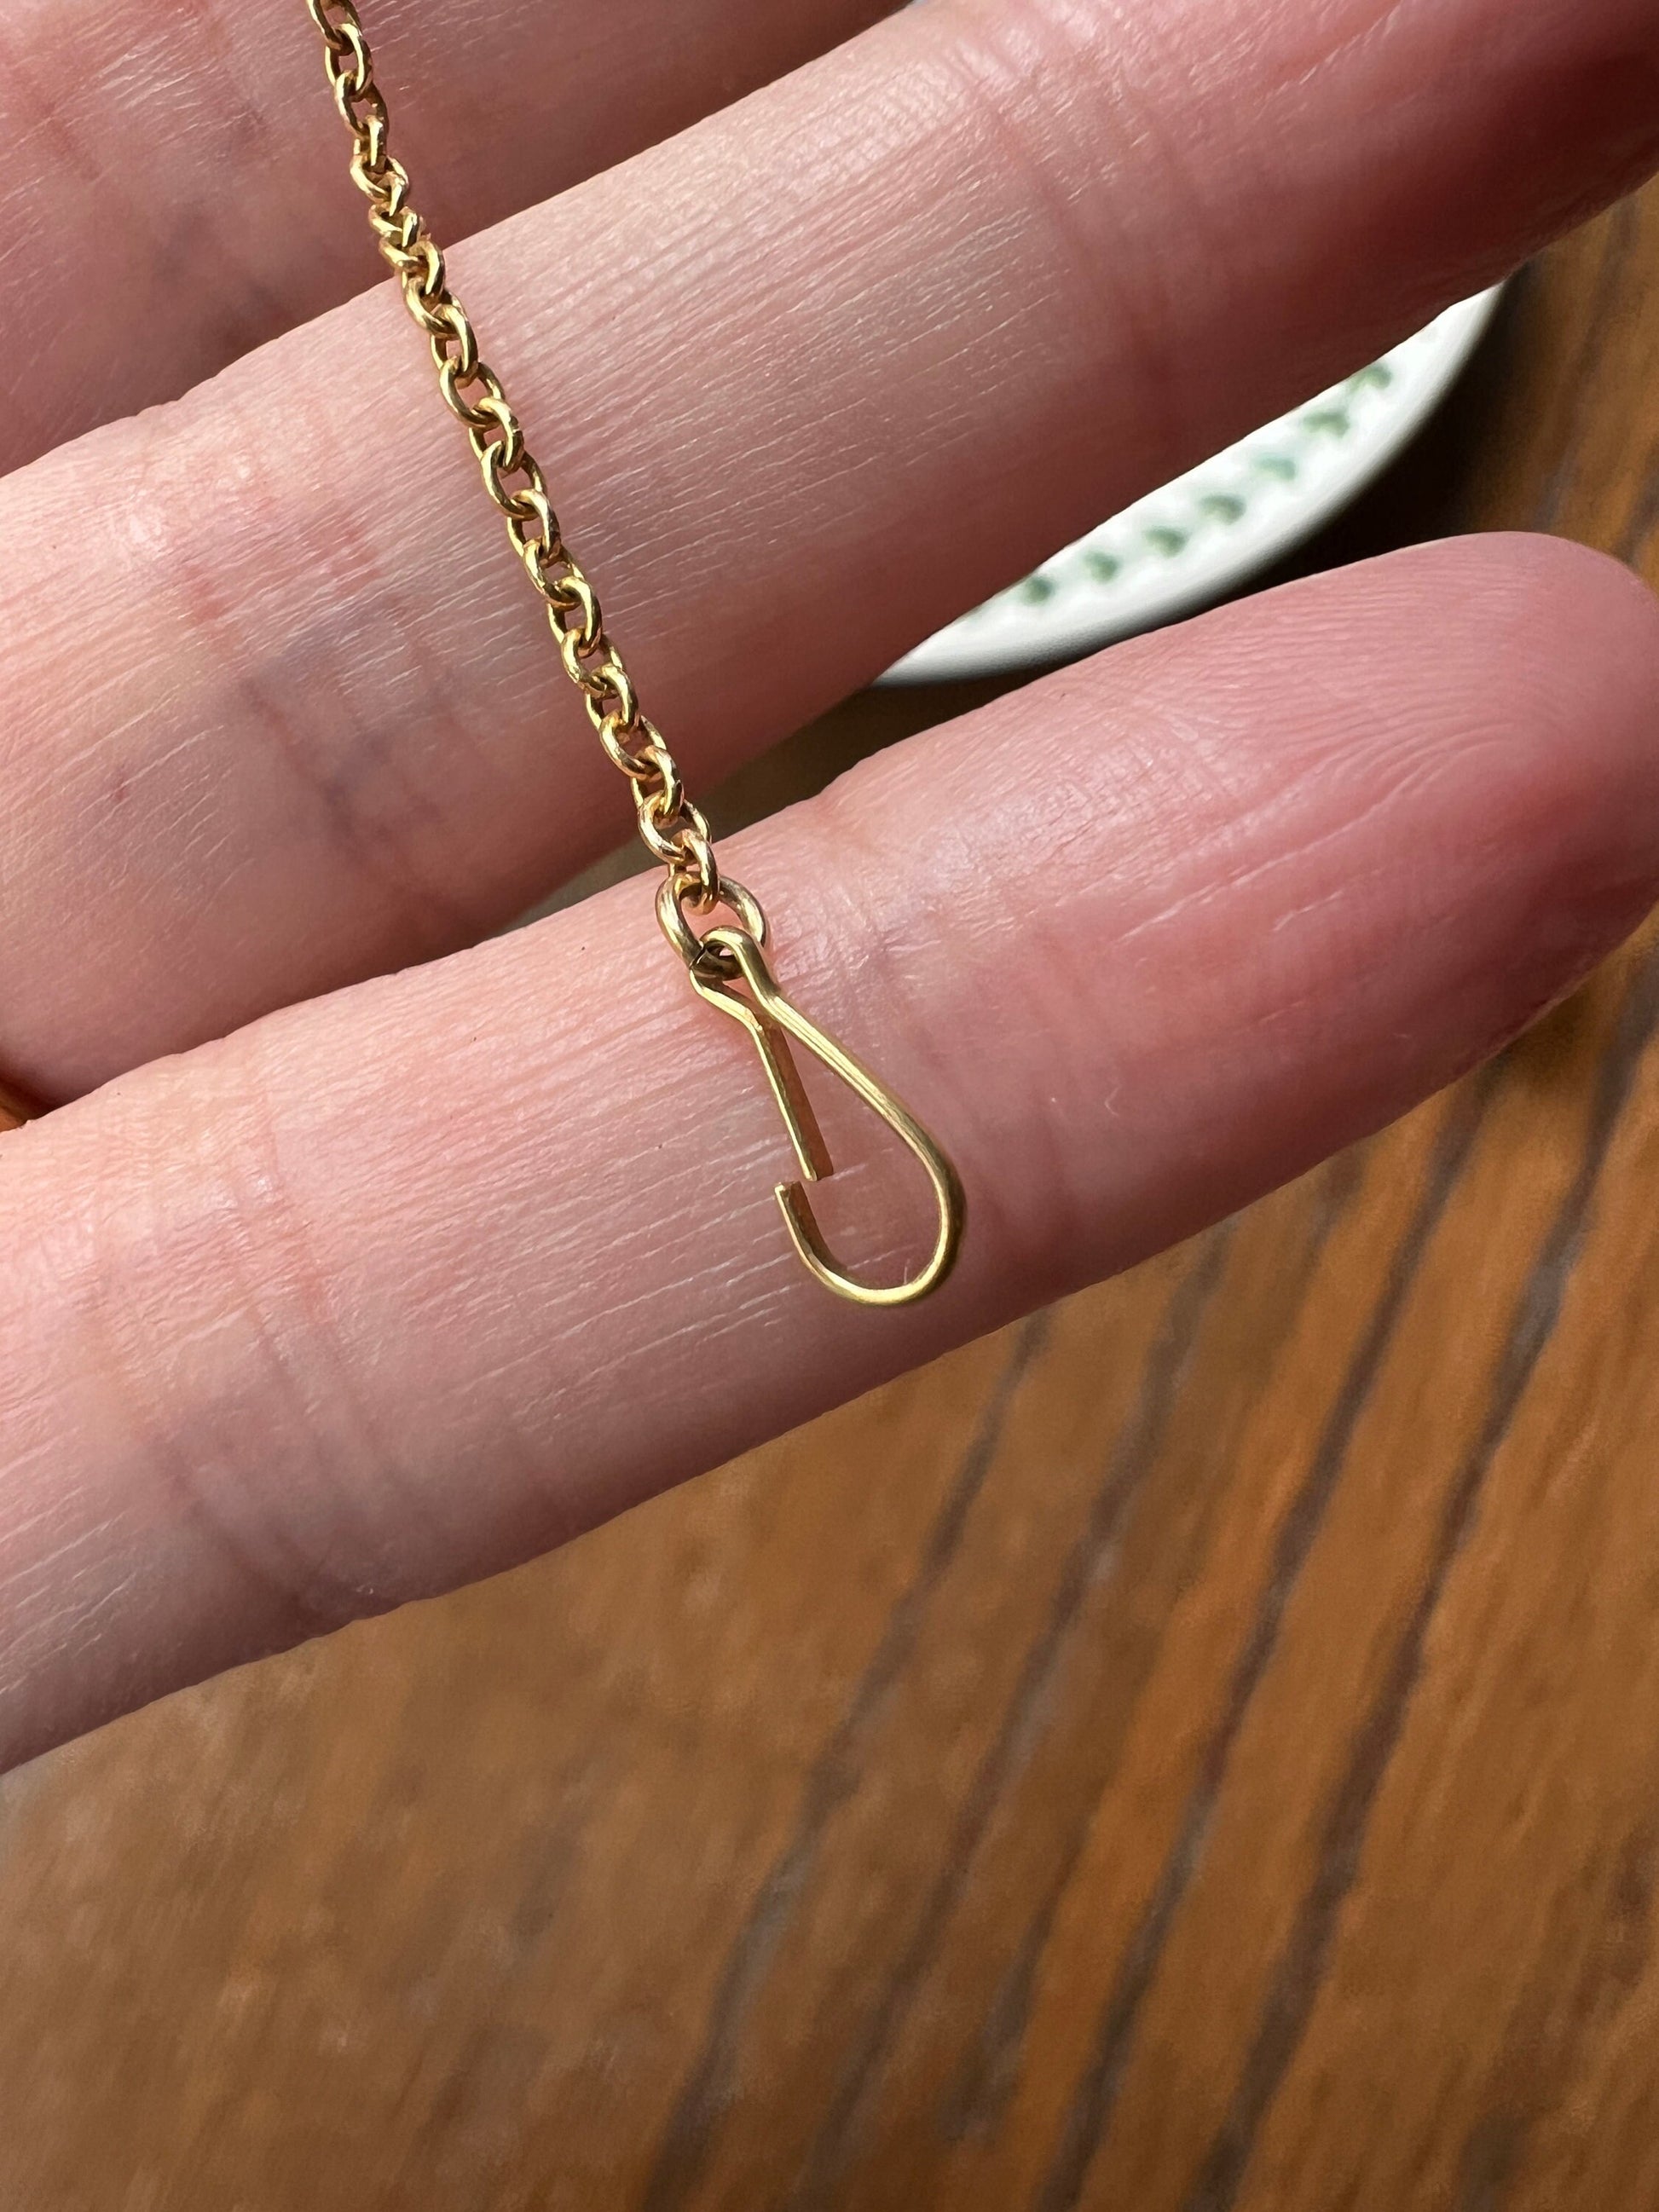 Hanger HOOK Dainty CHAIN Doodad French ANTIQUE .5g 18k Gold Solid 67mm Pendant Holder Extender Connector Neckmess Neckstack Parts Findings